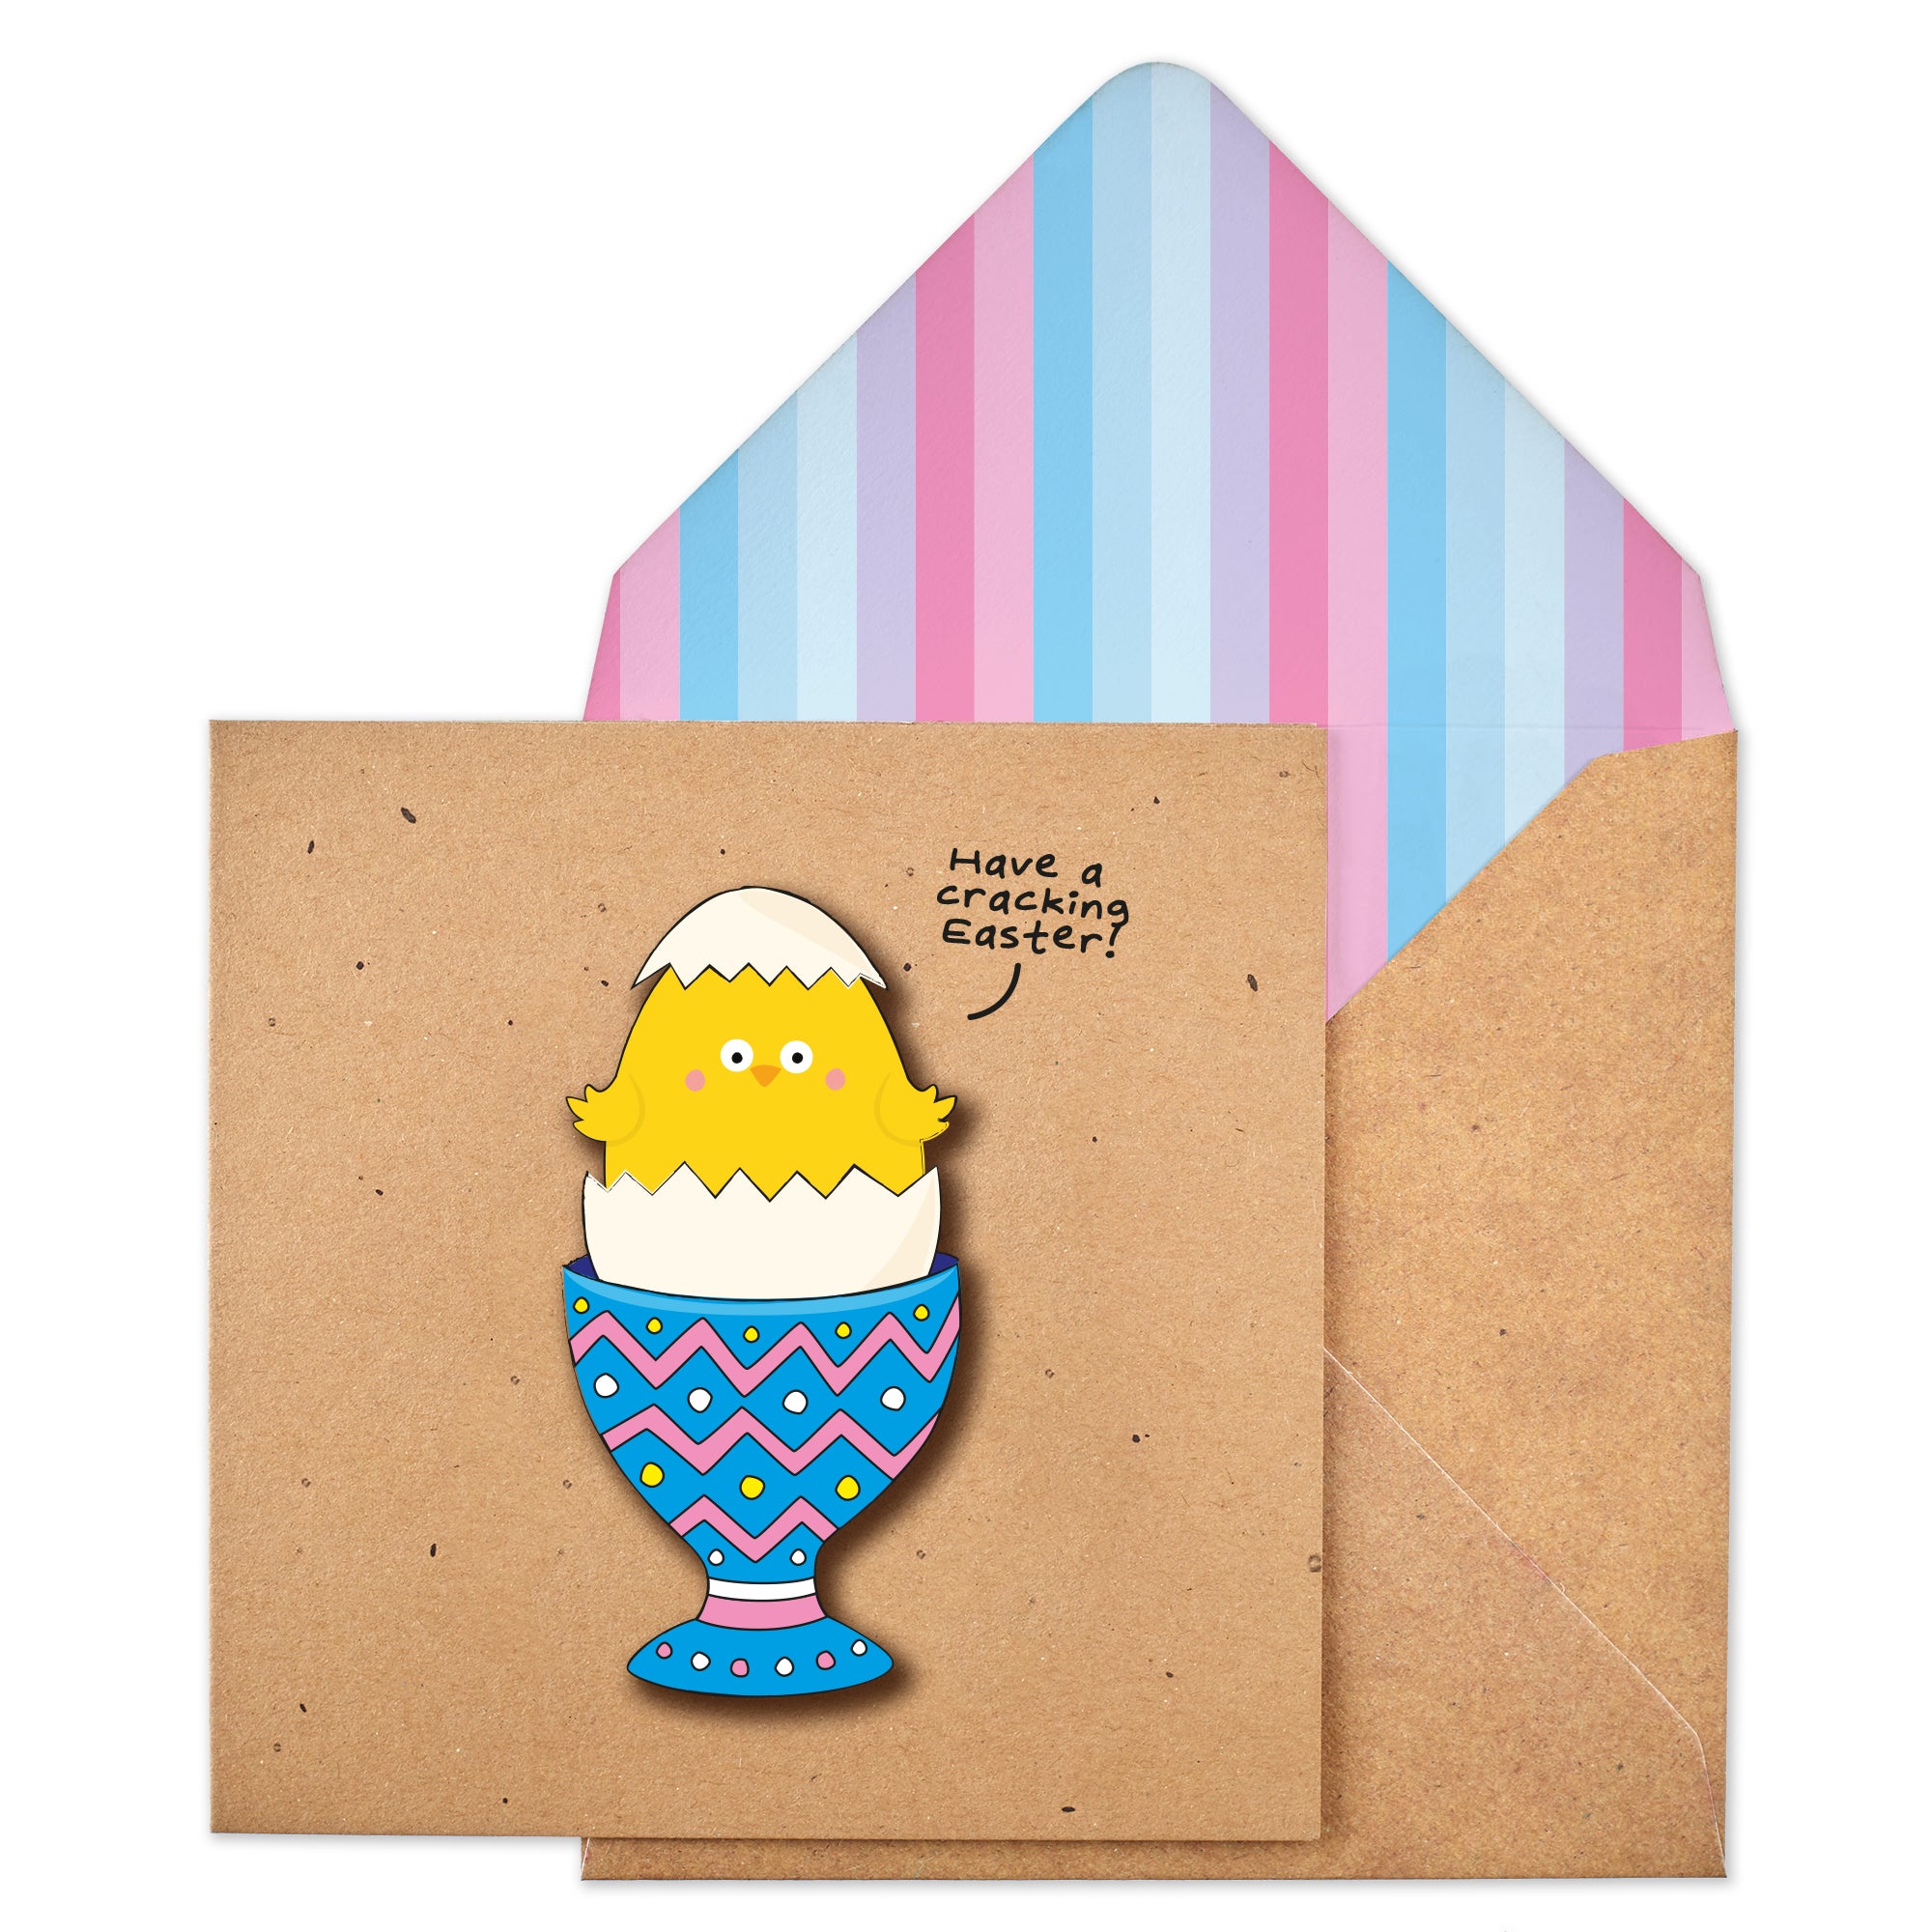 Cracking Easter Funny Egg Cup Card by penny black